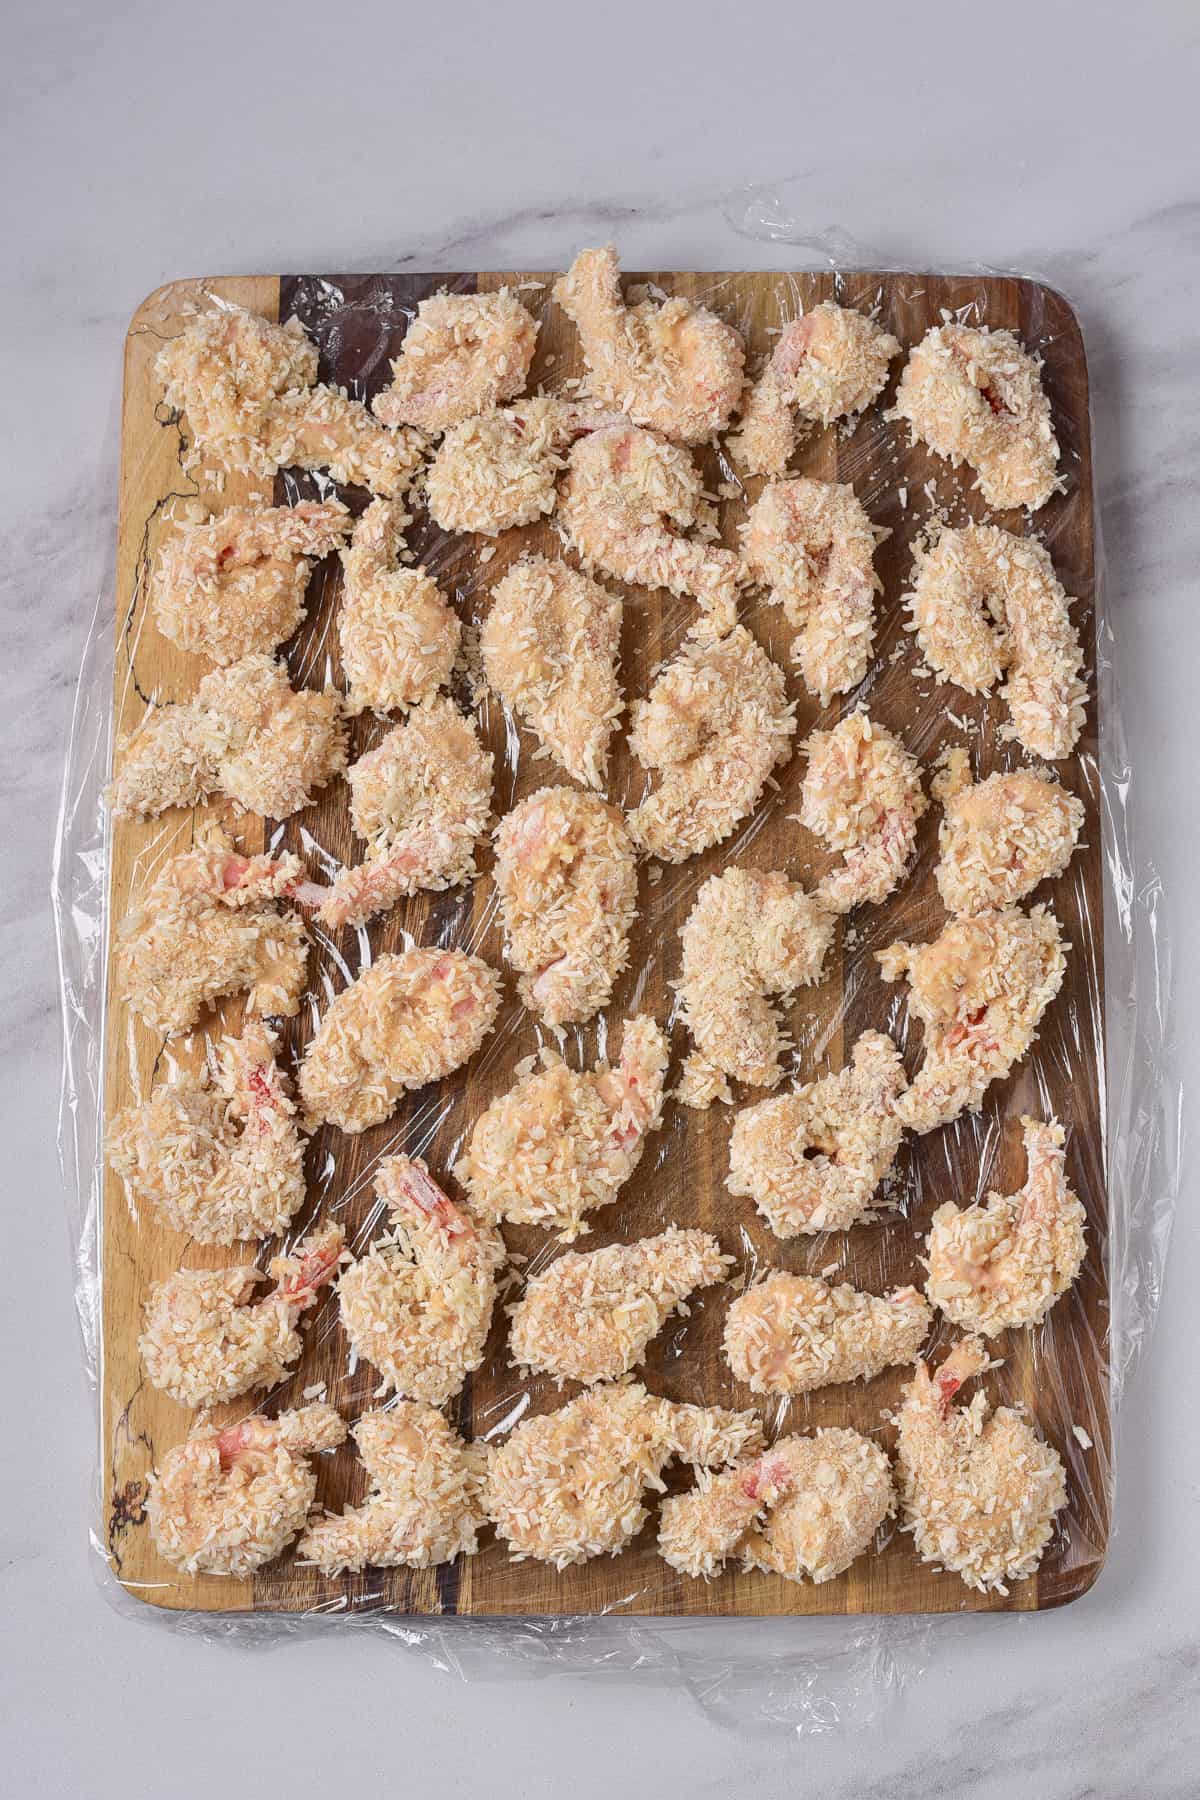 Coated shrimp laid out on a wooden board lined with plastic wrap.